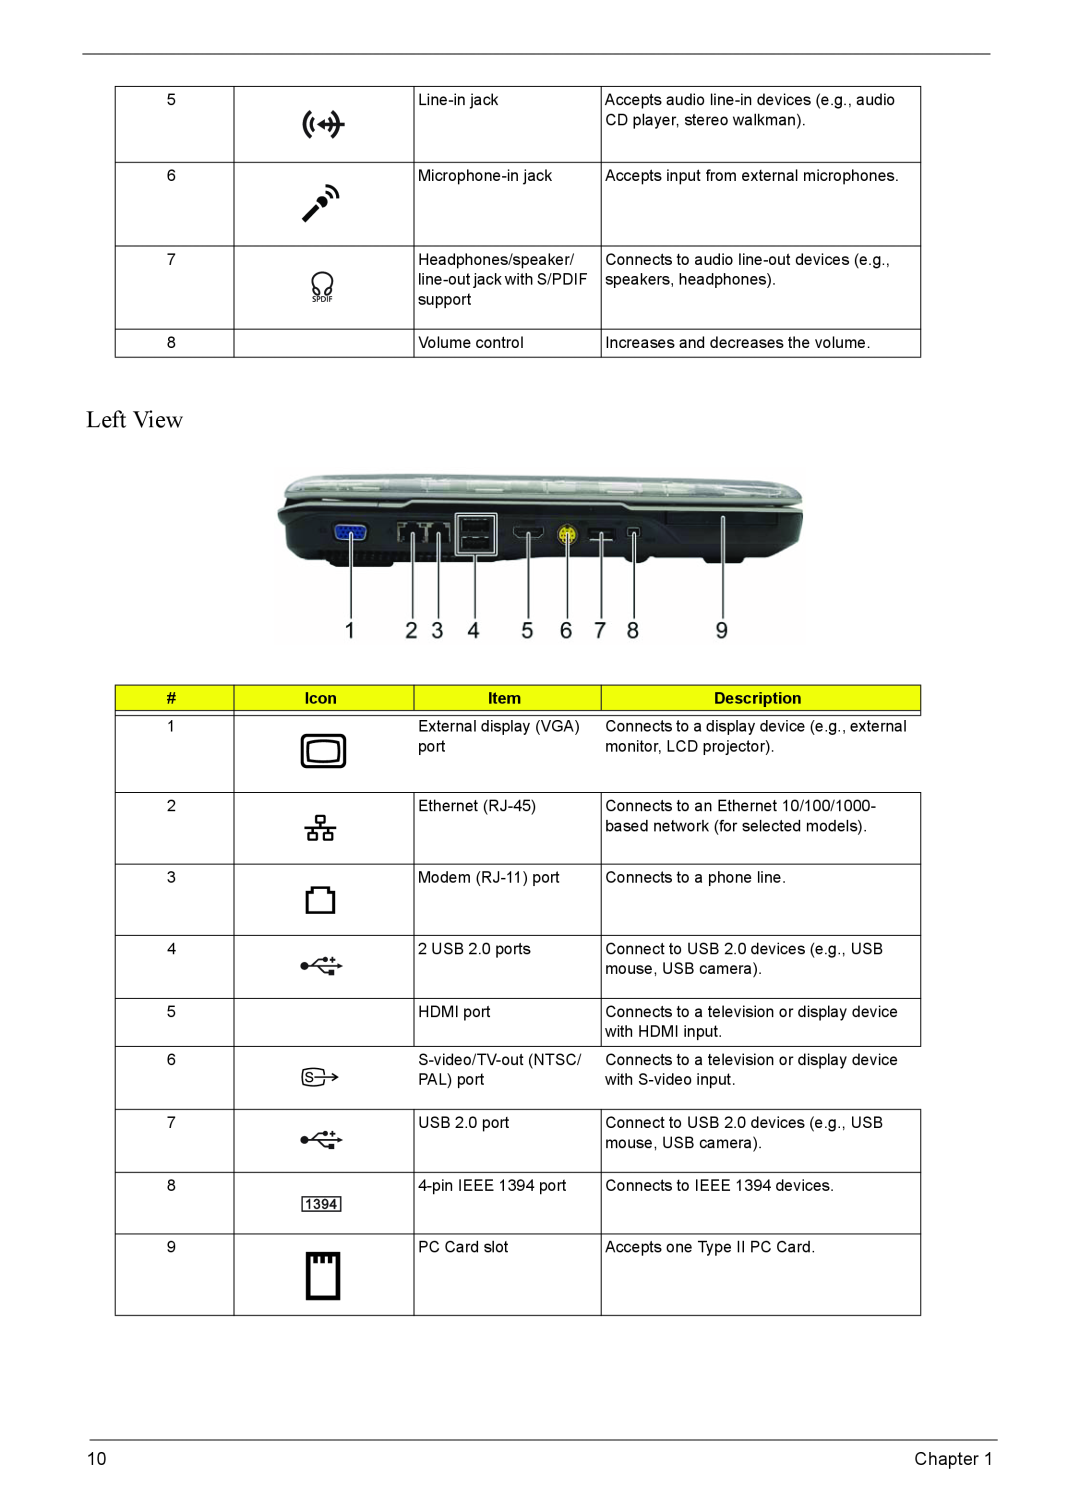 Acer 5920G Series manual Left View, Accepts audio line-in devices e.g., audio, Accepts input from external microphones 